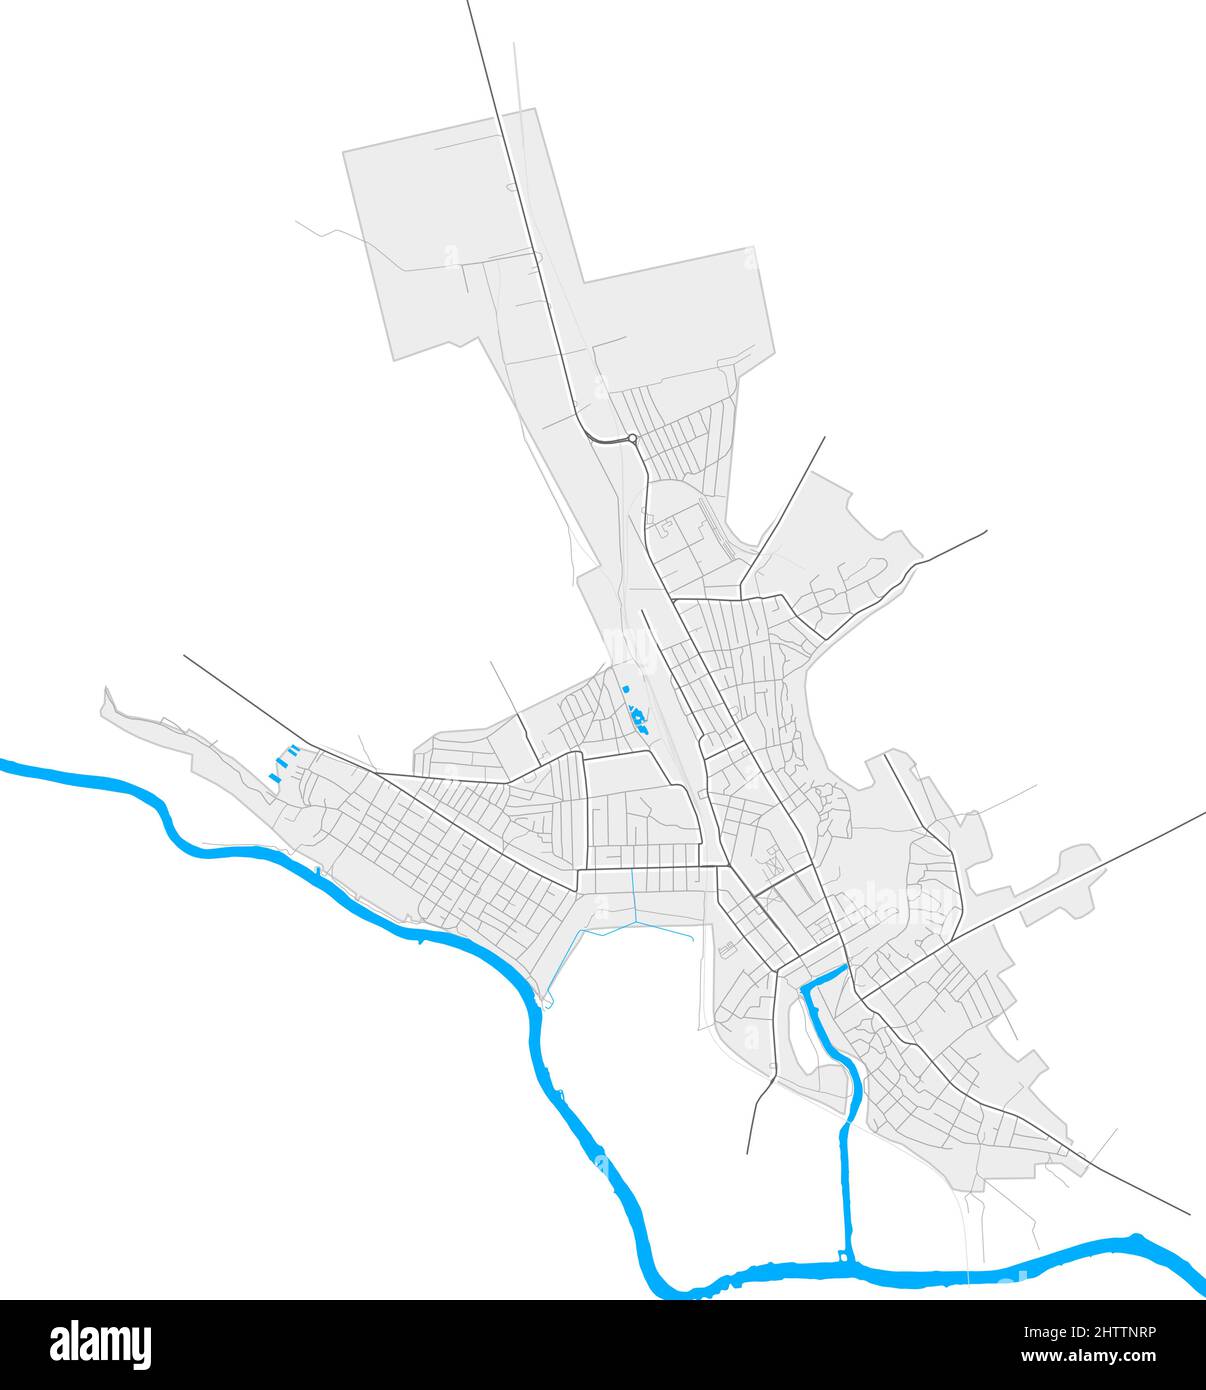 Voznesensk, Mykolaiv Oblast, Ukraine high resolution vector map with city boundaries and outlined paths. White additional outlines for main roads. Man Stock Vector